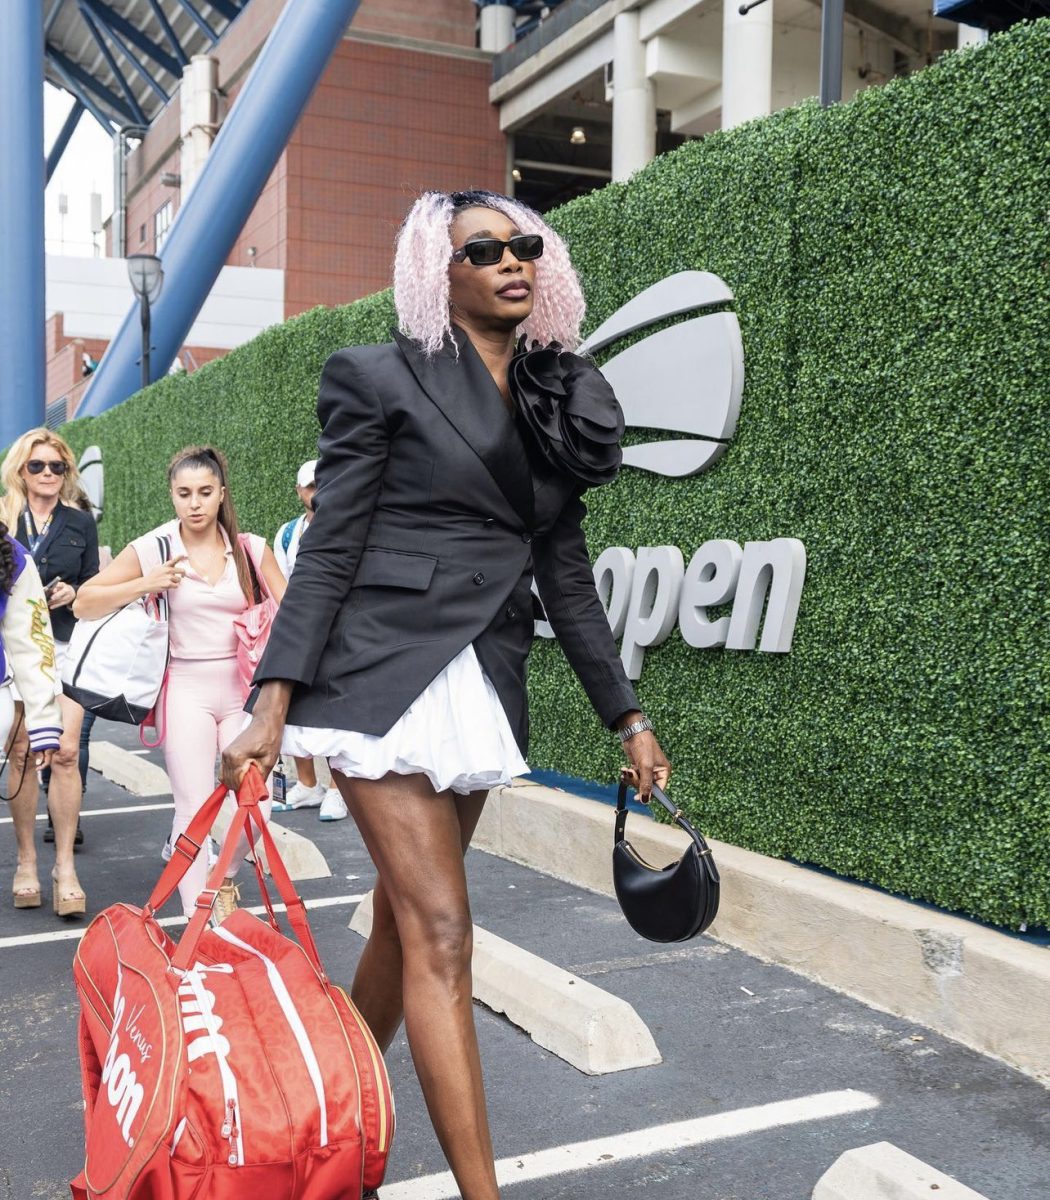 U.S.+Open+players+express+their+voice+through+bold+fashion+choices.+%28Courtesy+of+Instagram%29